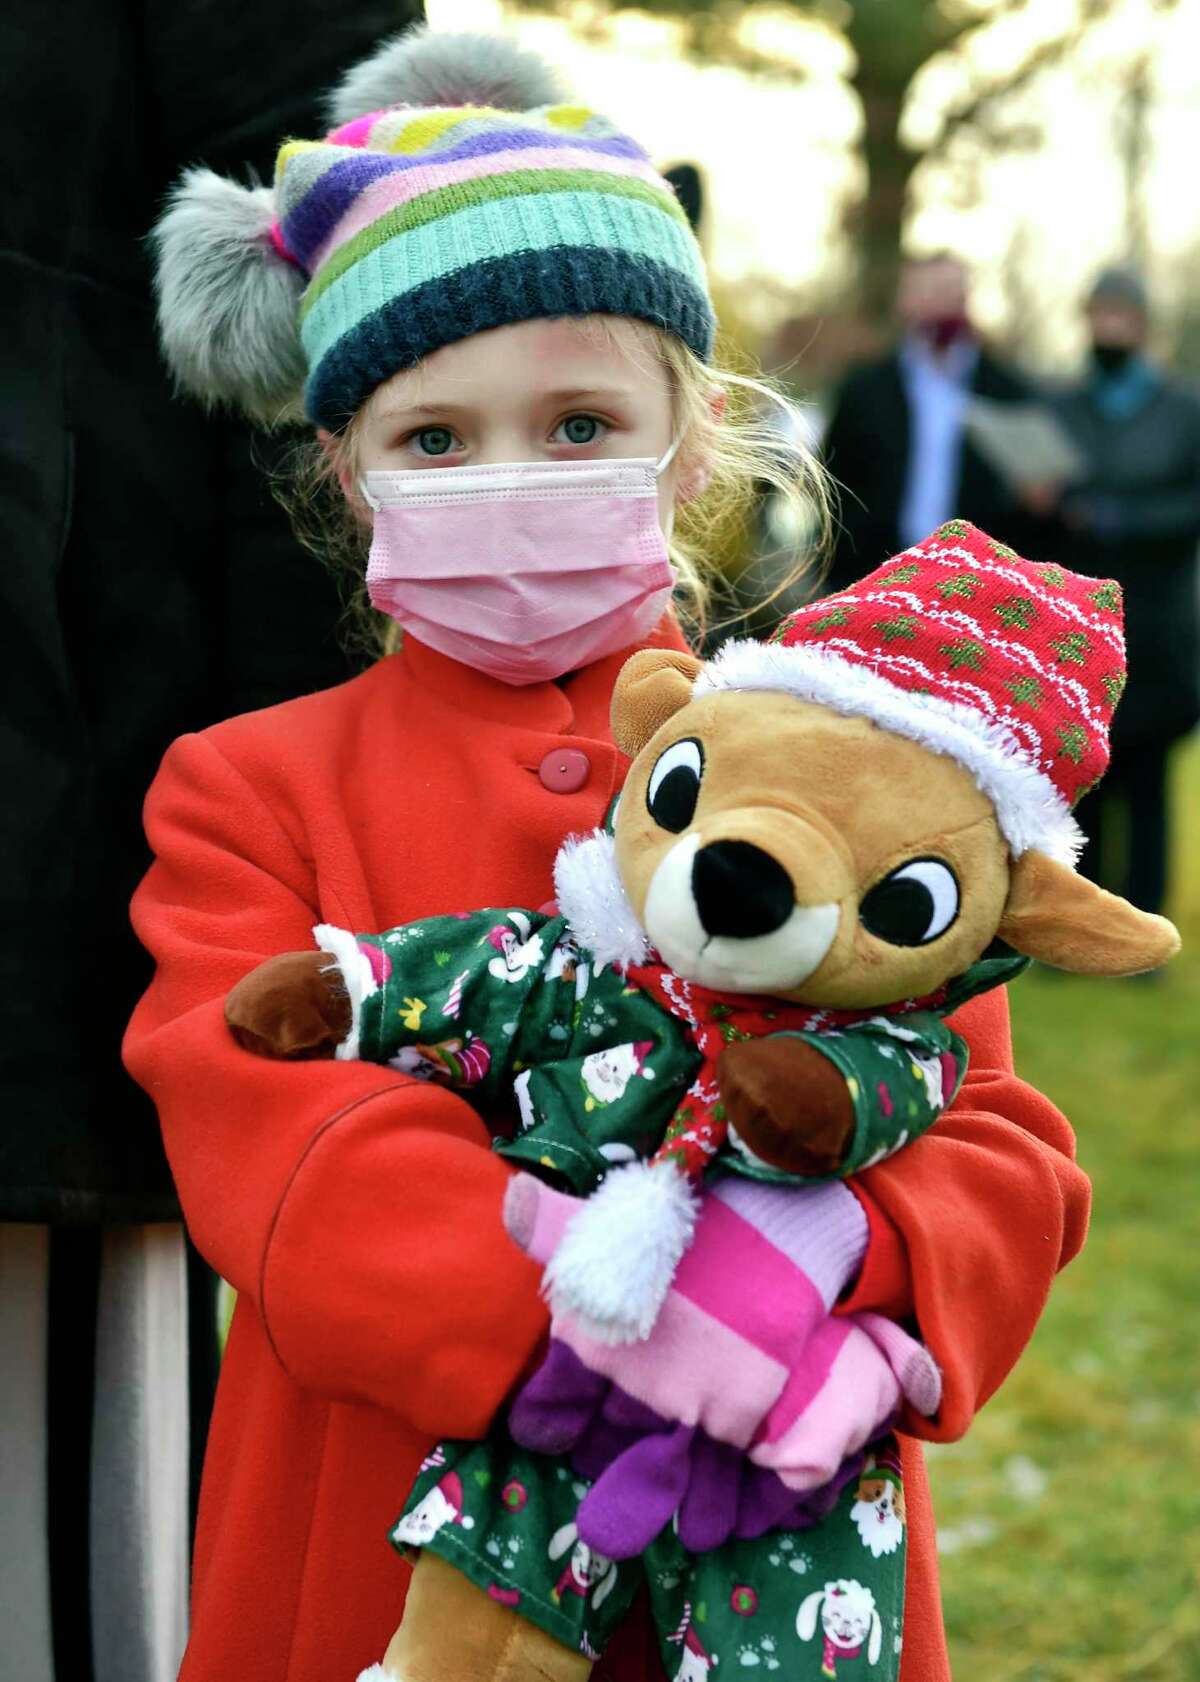 Charlotte Wussler, 6, attends Second Congregational Church's Outdoor Christmas Pageant and Petting Zoo in Greenwich, Conn., on Friday December 24, 2021. "The hope and joy of Christmas lift our spirits in any year," says Senior Minister Maxwell Grant. "We wanted to make sure we offered a safe way for friends to gather, and for kids to keep teaching us the story."